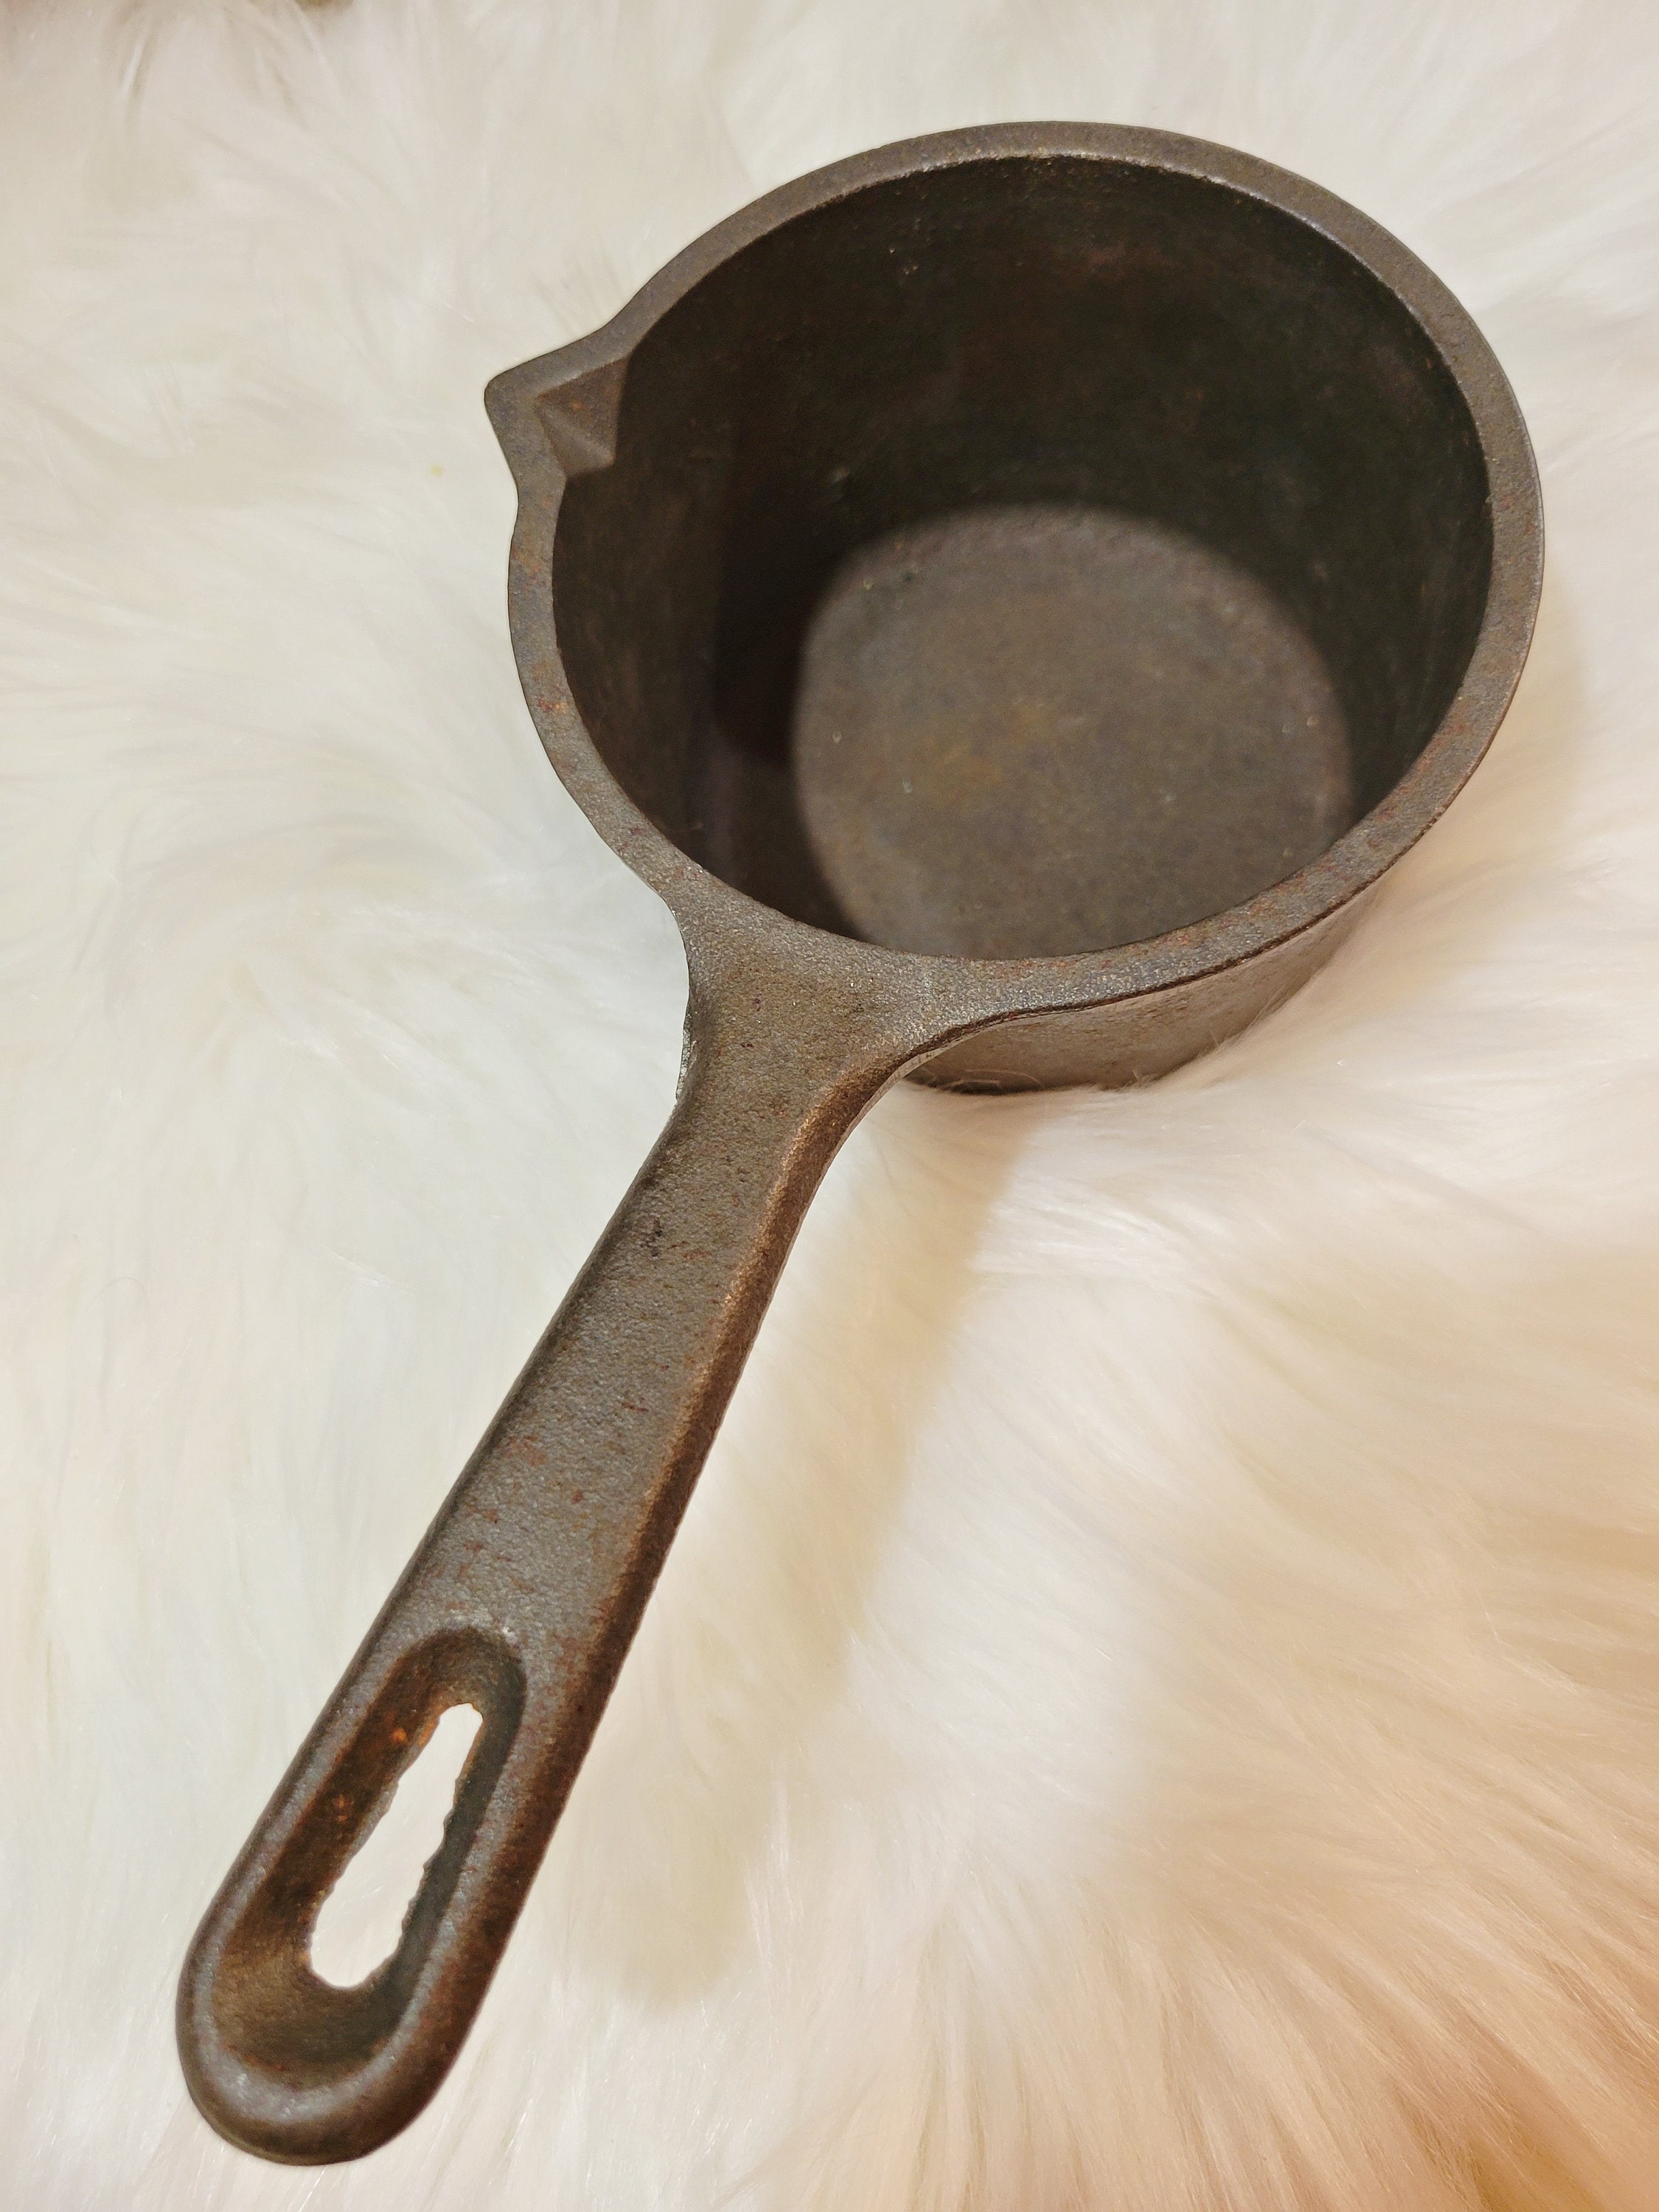 Vintage Lodge Cast Iron Melting Pot Sauce Pan Spout Smelting 2 Cup USA -  collectibles - by owner - craigslist